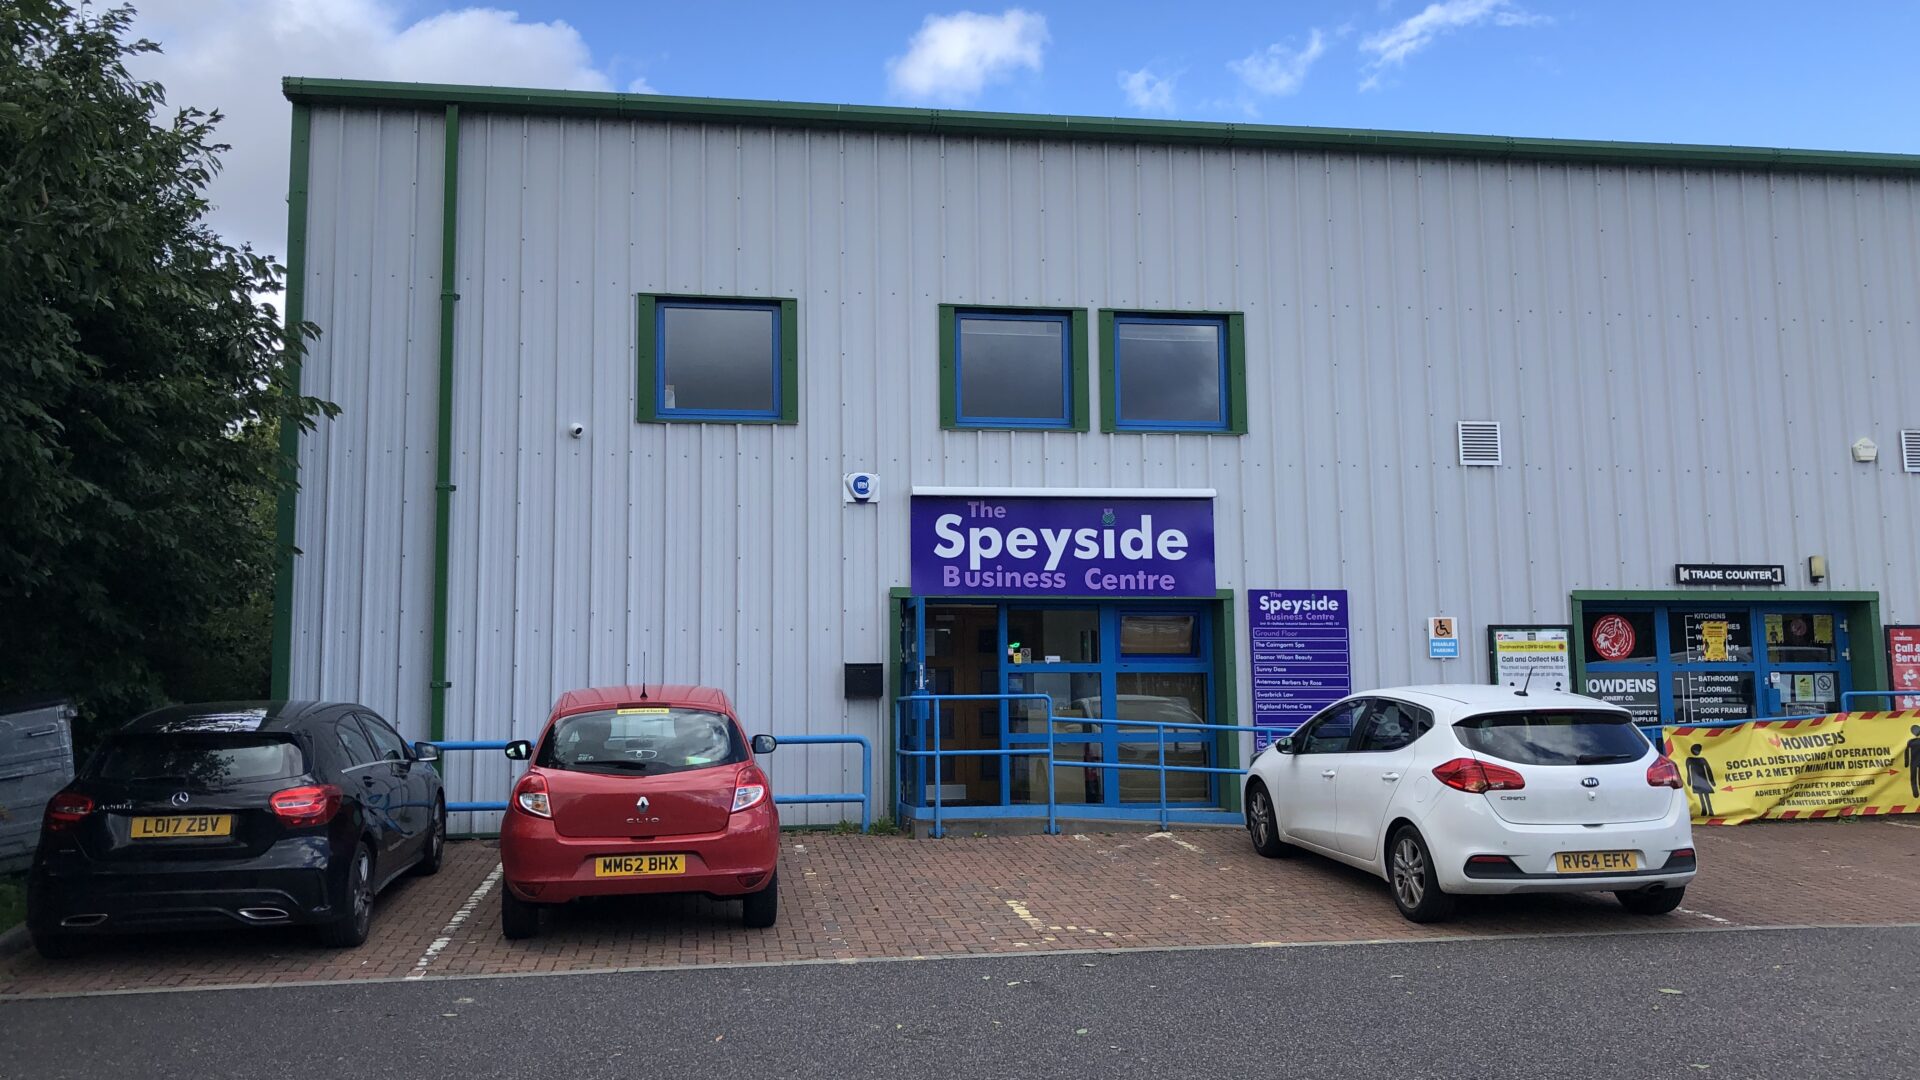 Shepherd brings to market trio of first floor offices in Aviemore’s Speyside Business Centre for lease